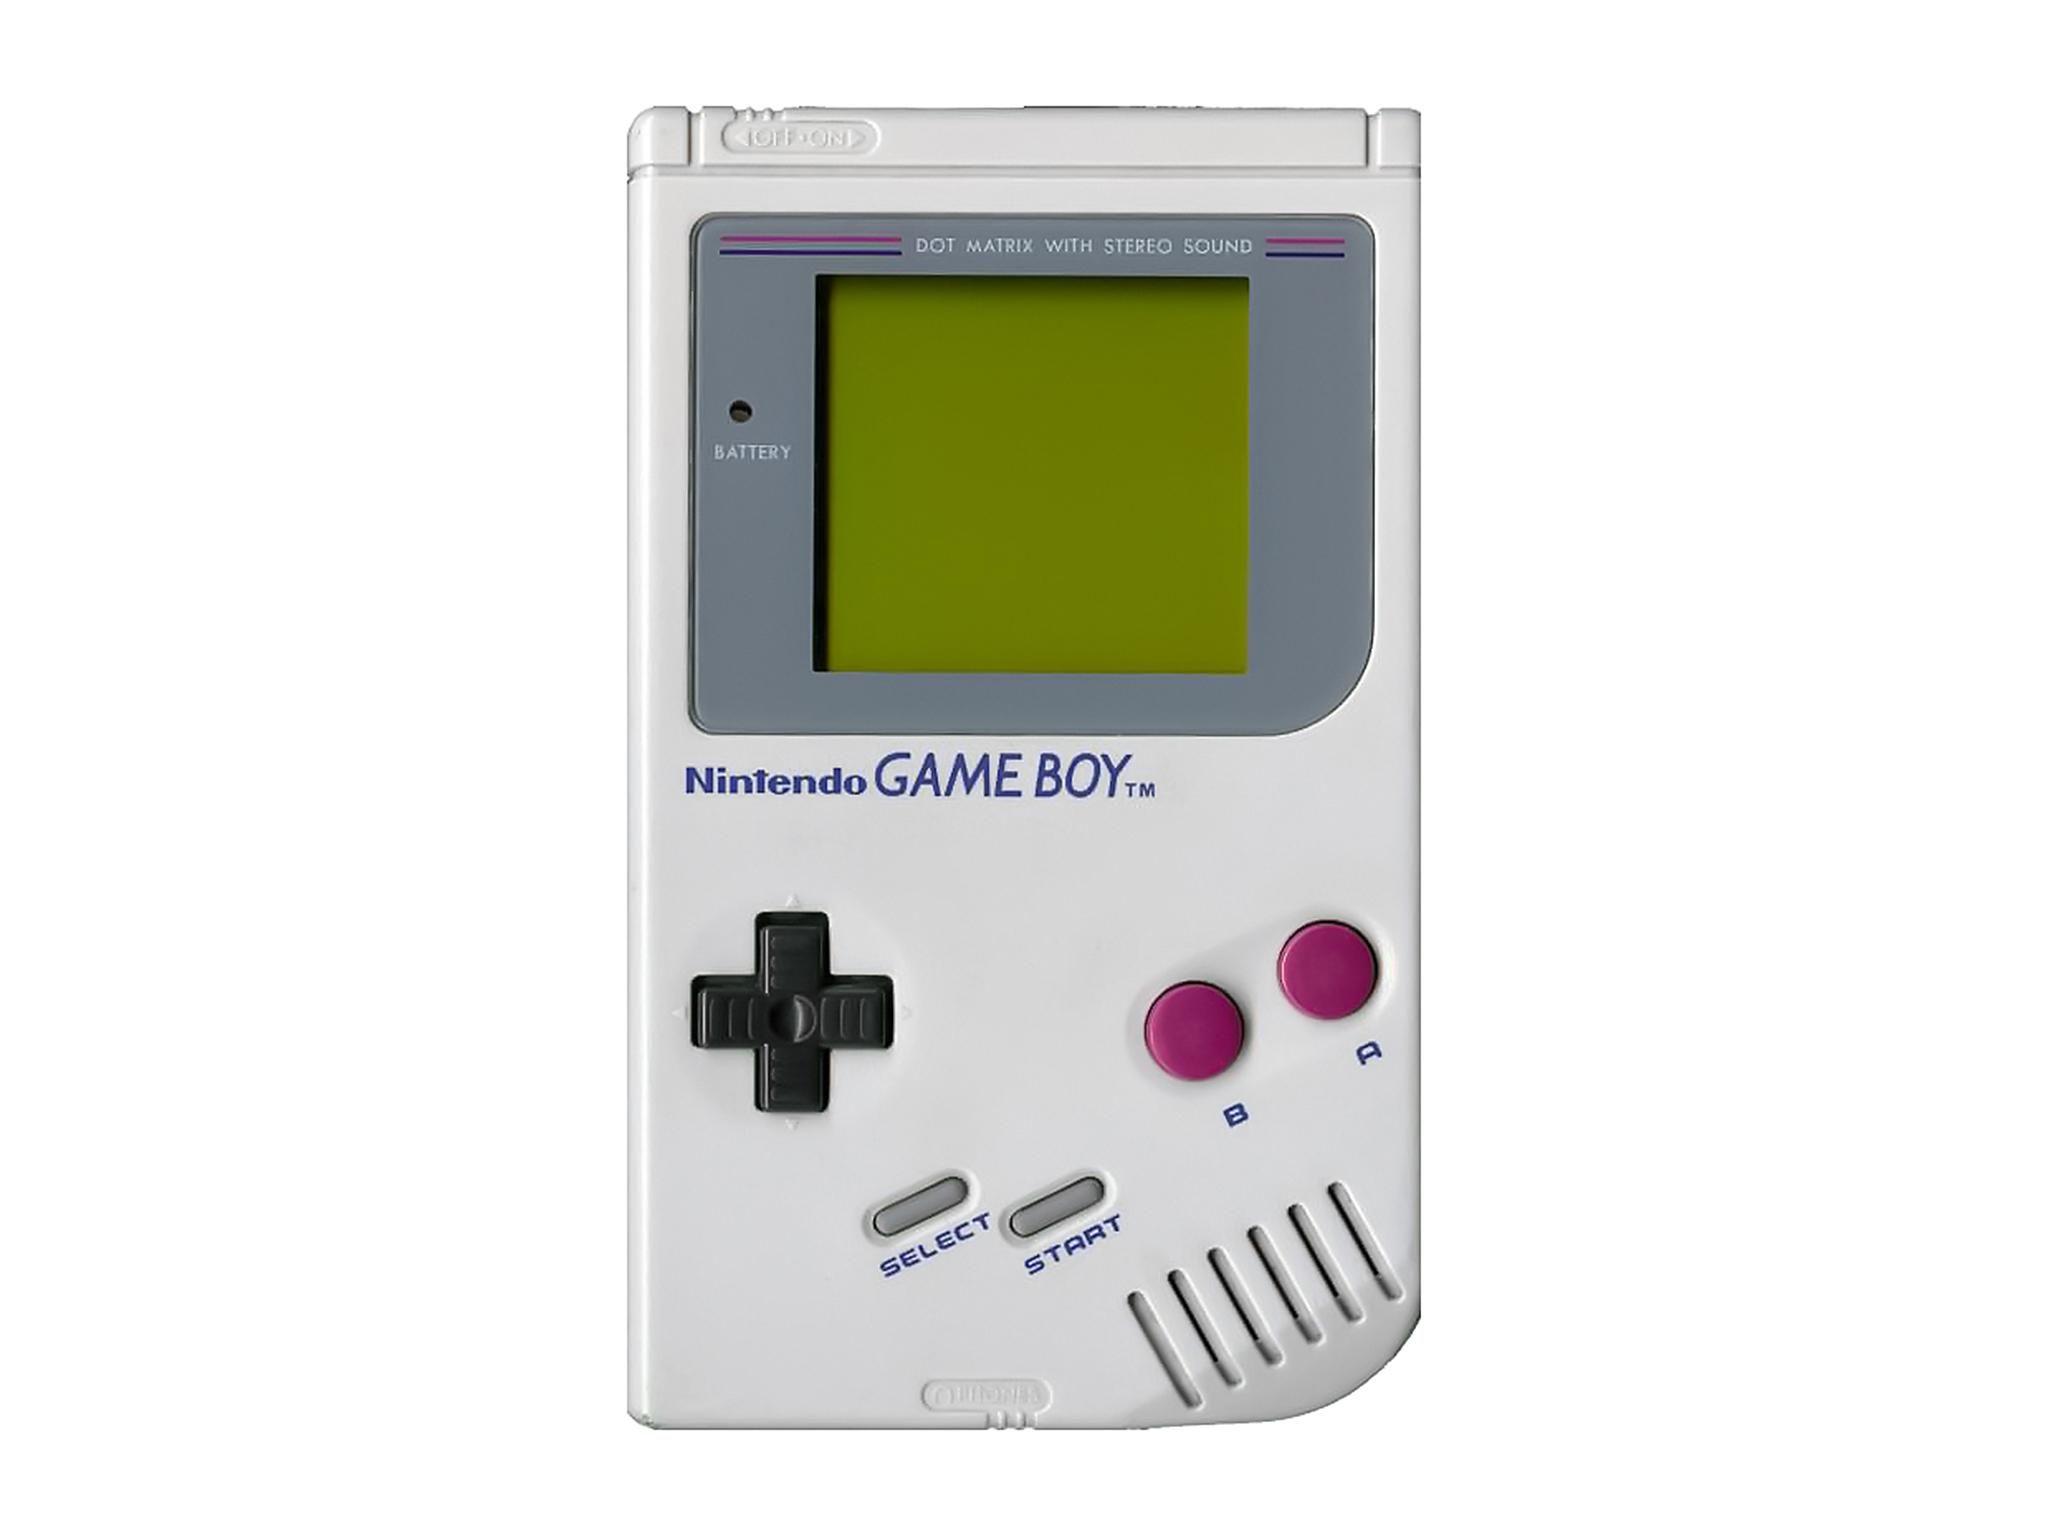 Game Boy could be latest classic console to return, Nintendo